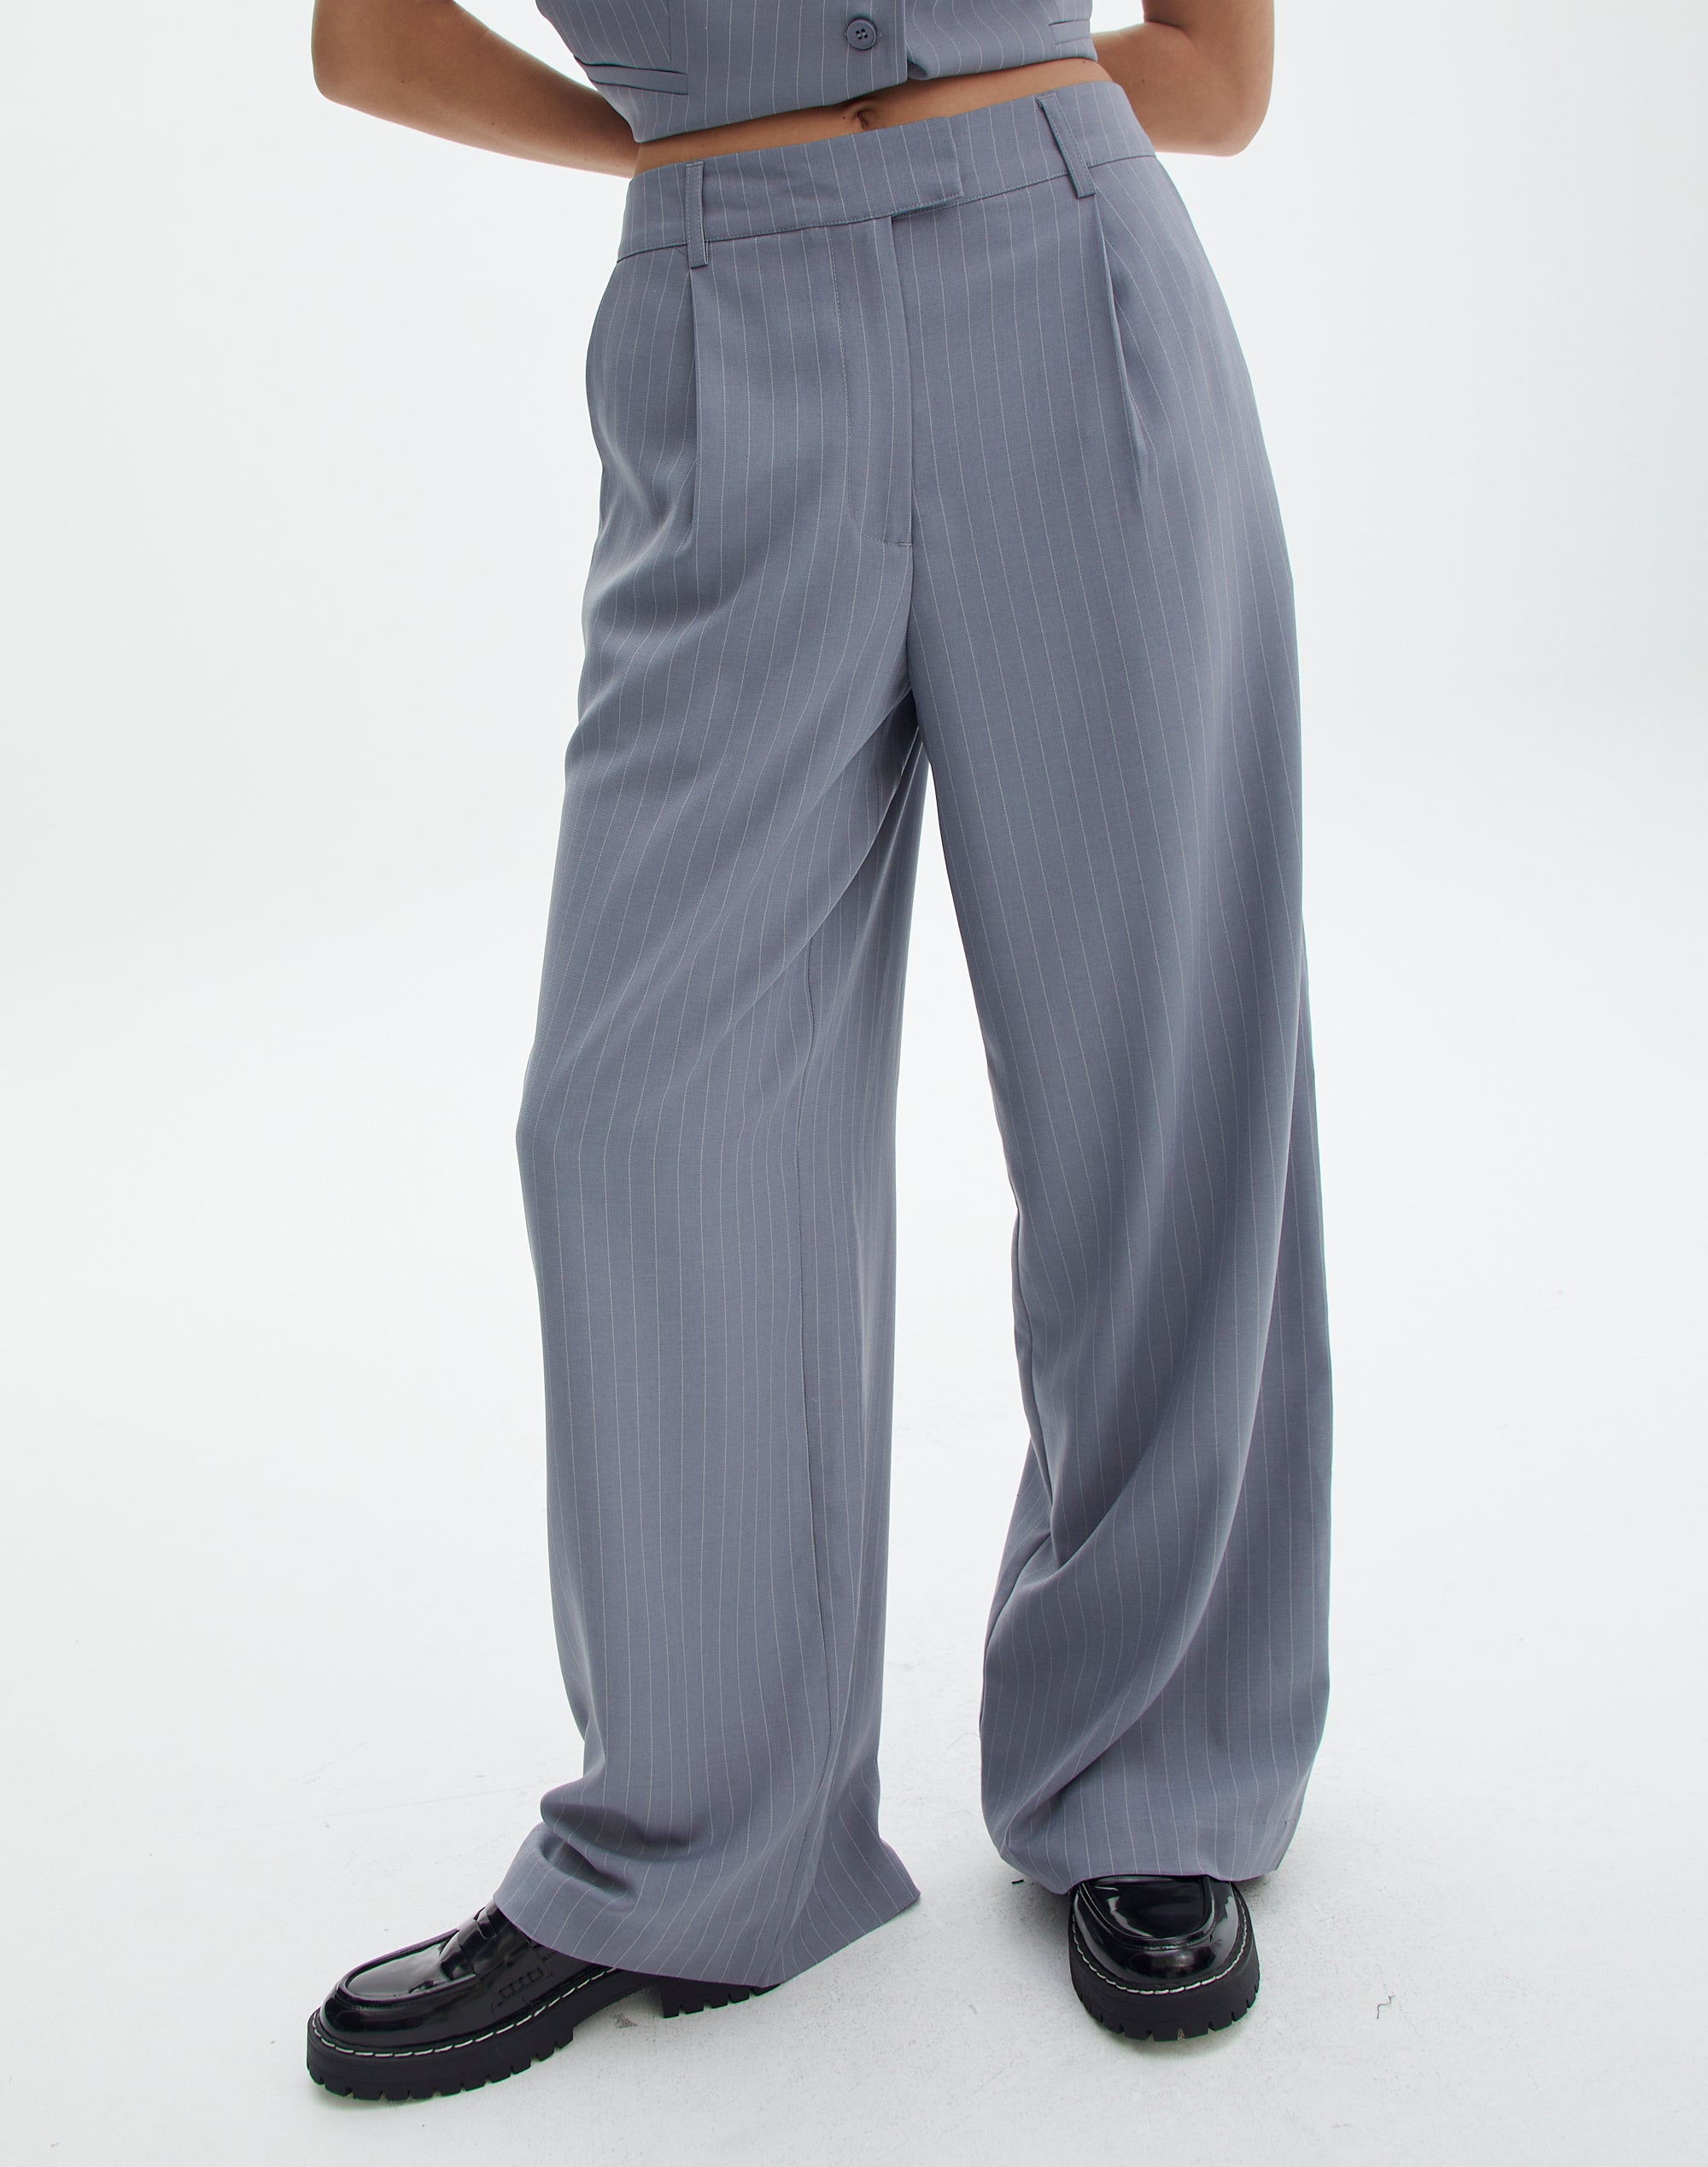 12288 Pinstripe Pants Trousers Slacks Stock Photos HighRes Pictures and  Images  Getty Images